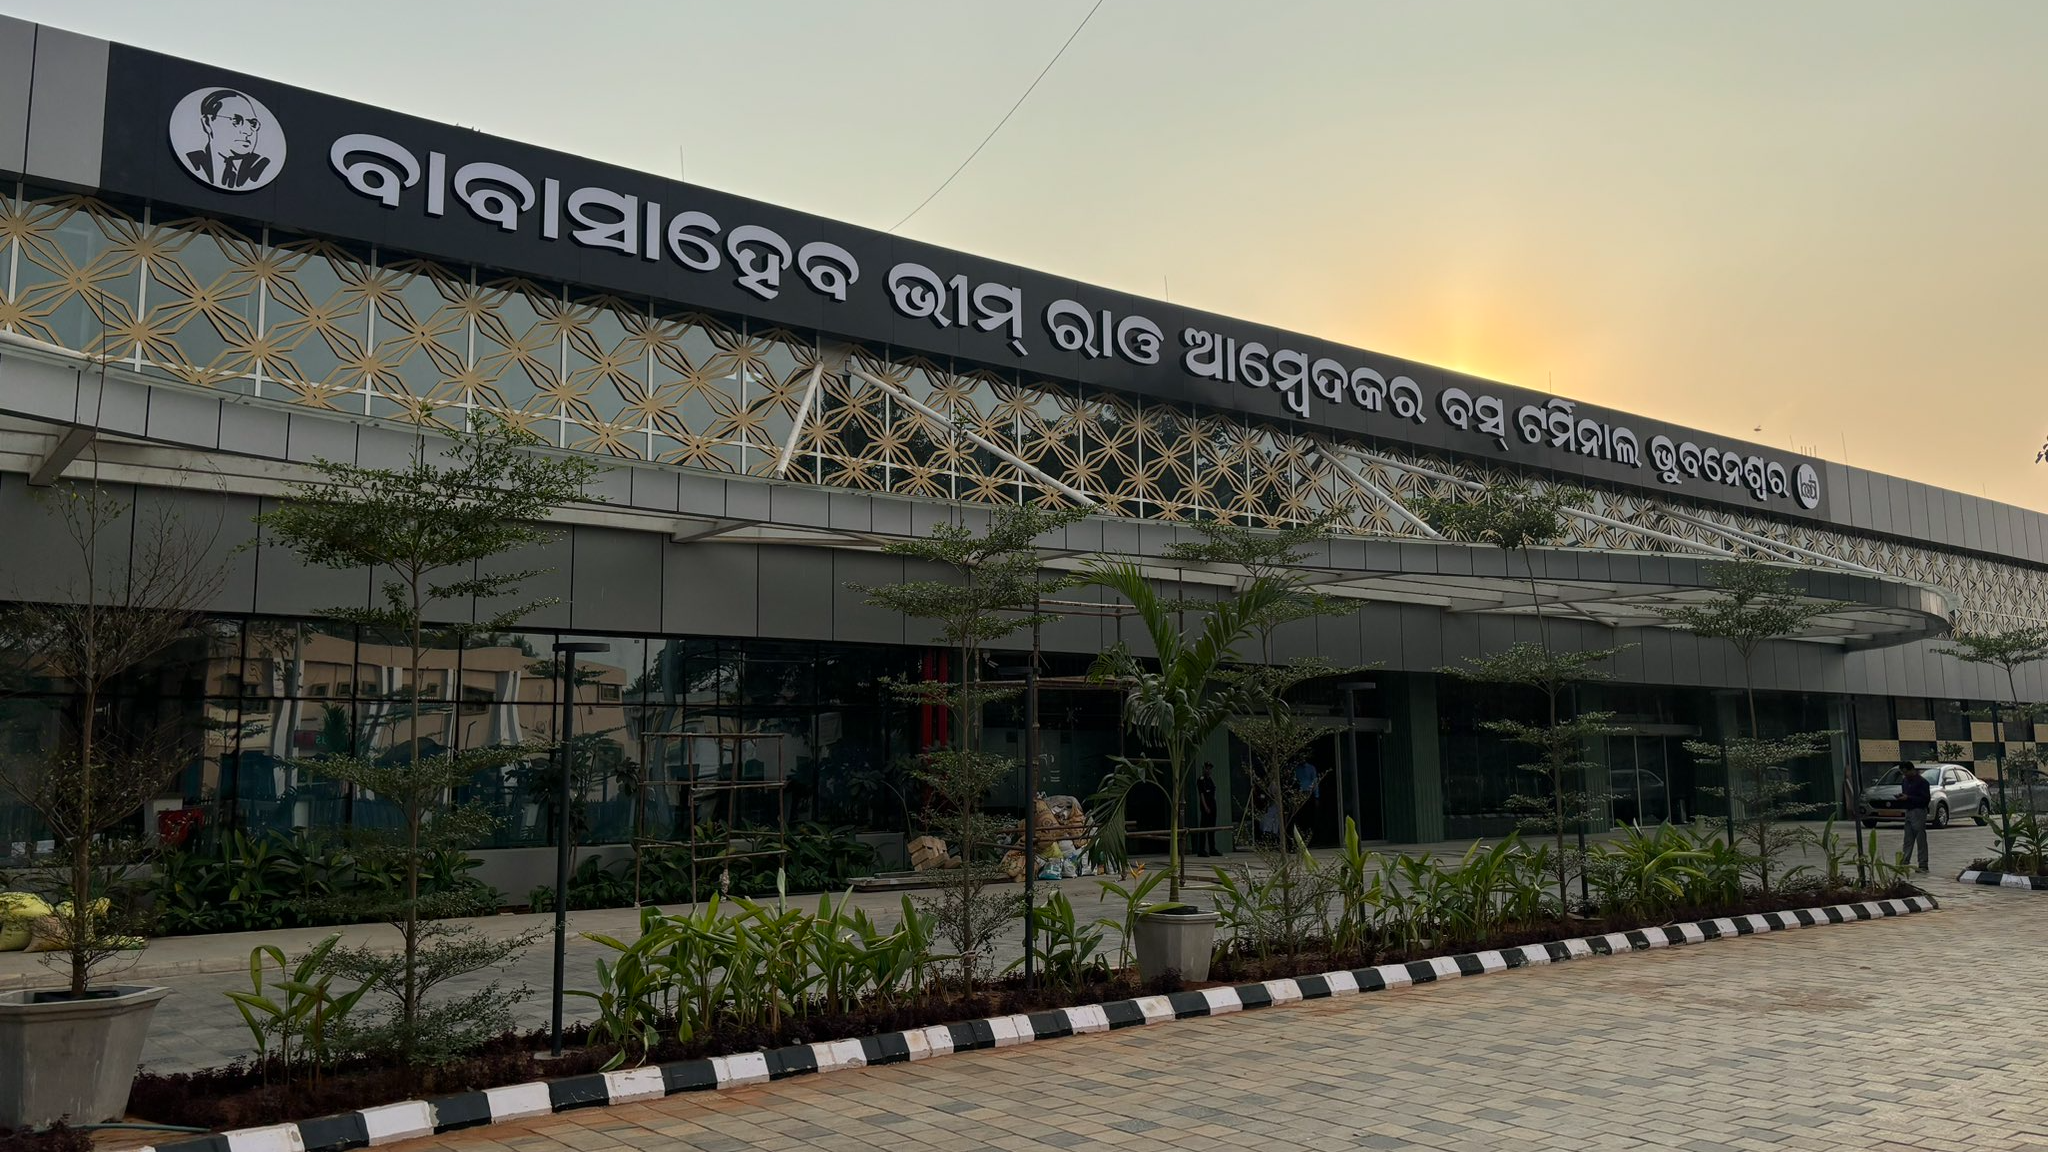 Odisha Chief Minister Naveen Patnaik is scheduled to inaugurate the newly constructed Malkangiri Airport today facilitating air connectivity to the cut-off regions (Swabhman Anchal) of the state.